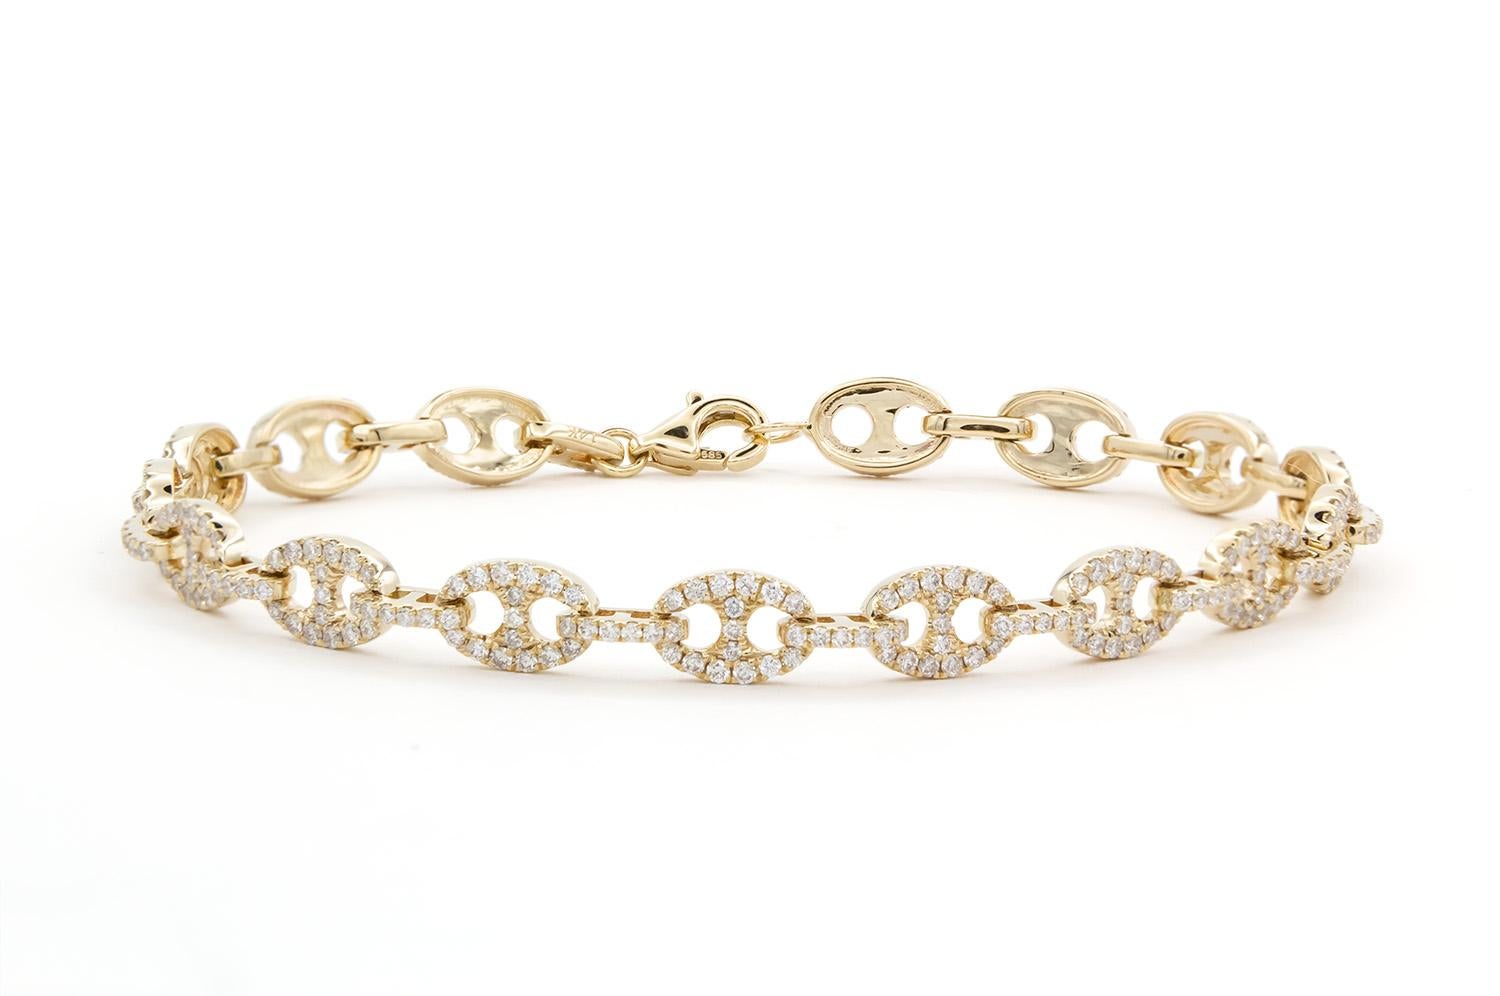 We are pleased to present this beautiful Brand New 14k Yellow Gold & Diamond Gucci Link Tennis Bracelet. It features 1.49ctw G-H/VS2-SI1 Round Brilliant Cut Diamonds set in this 14k yellow gold Gucci style link tennis bracelet. The bracelet measures